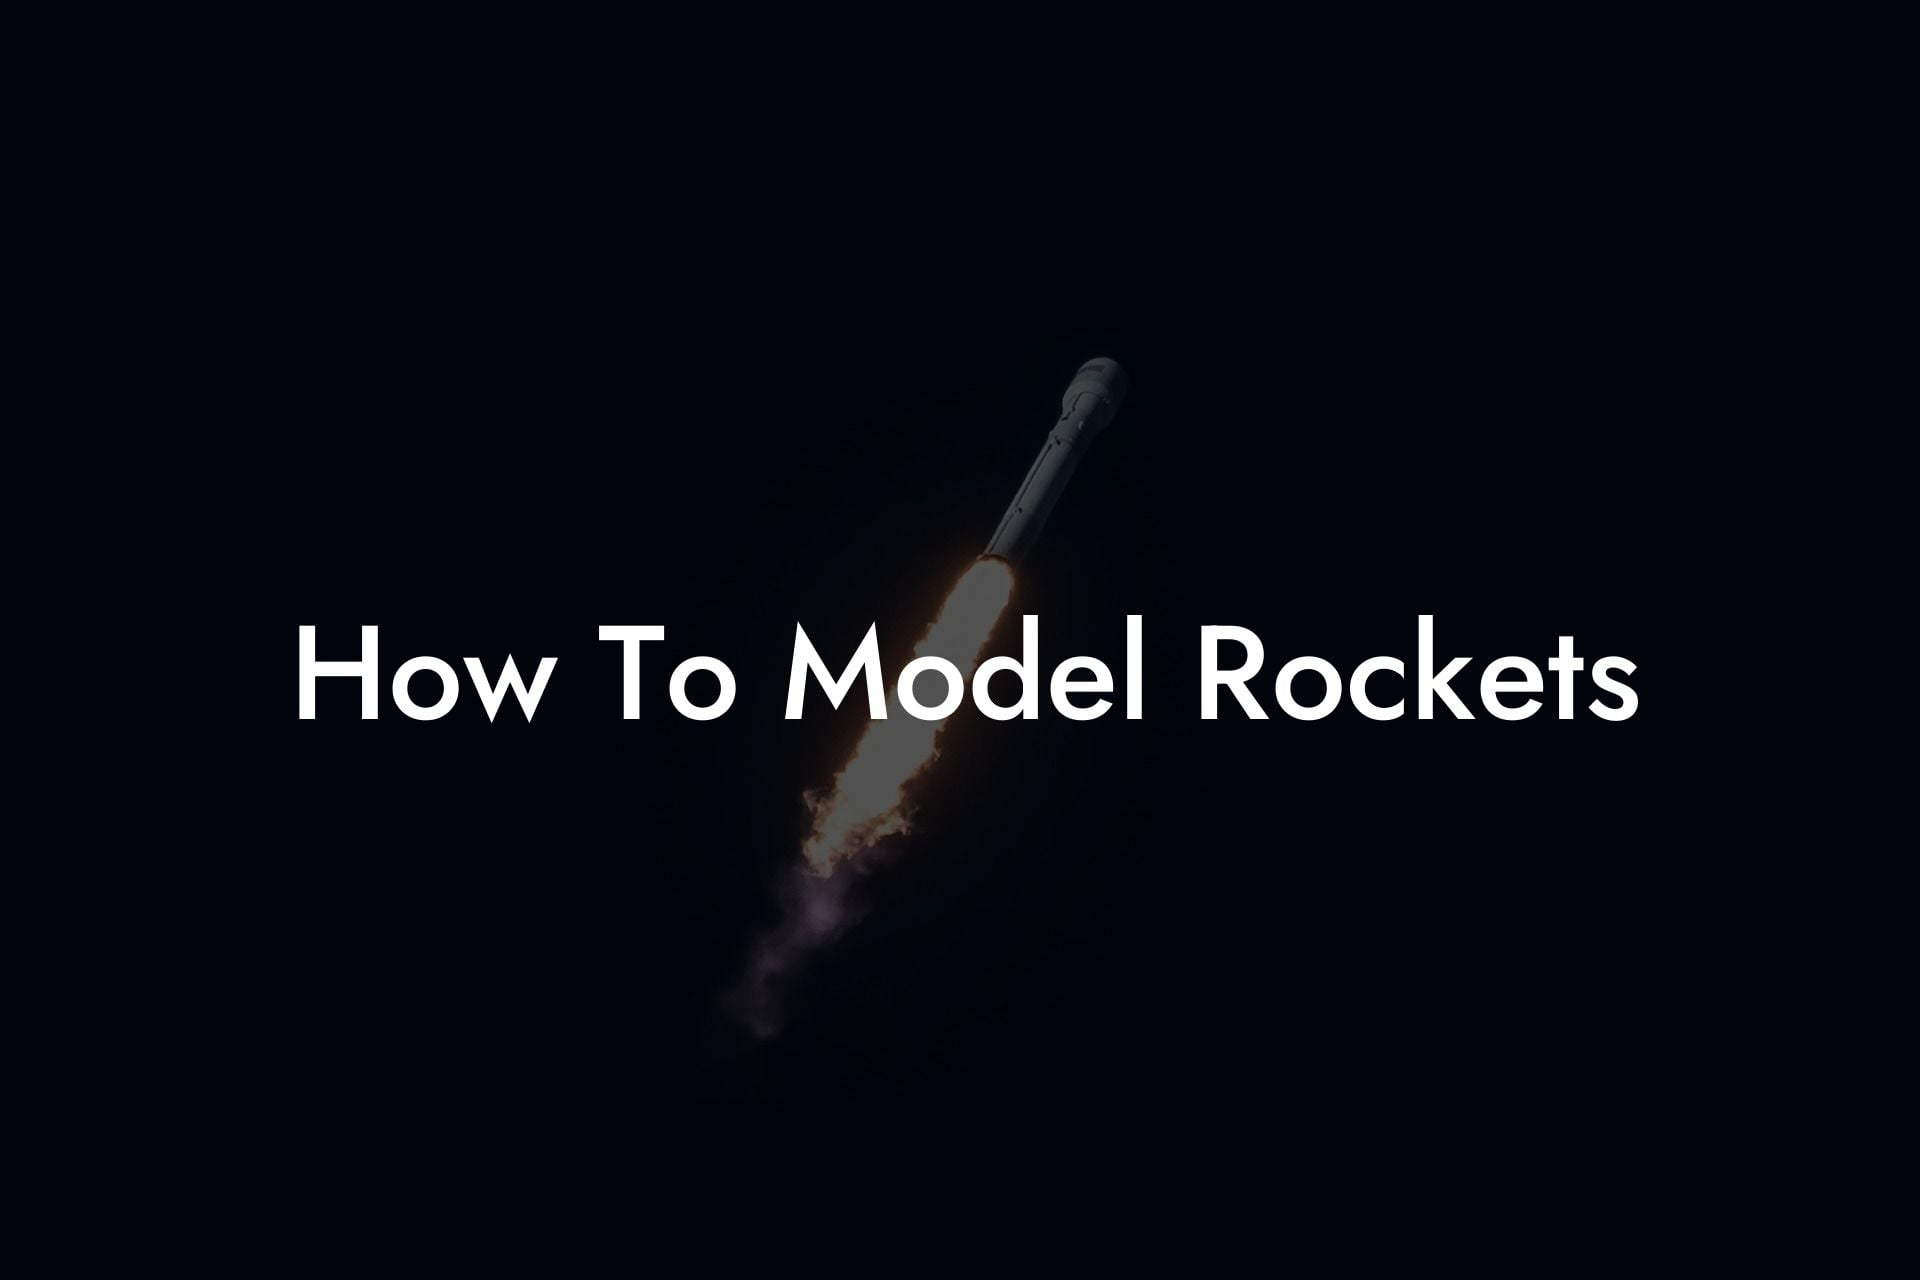 How To Model Rockets